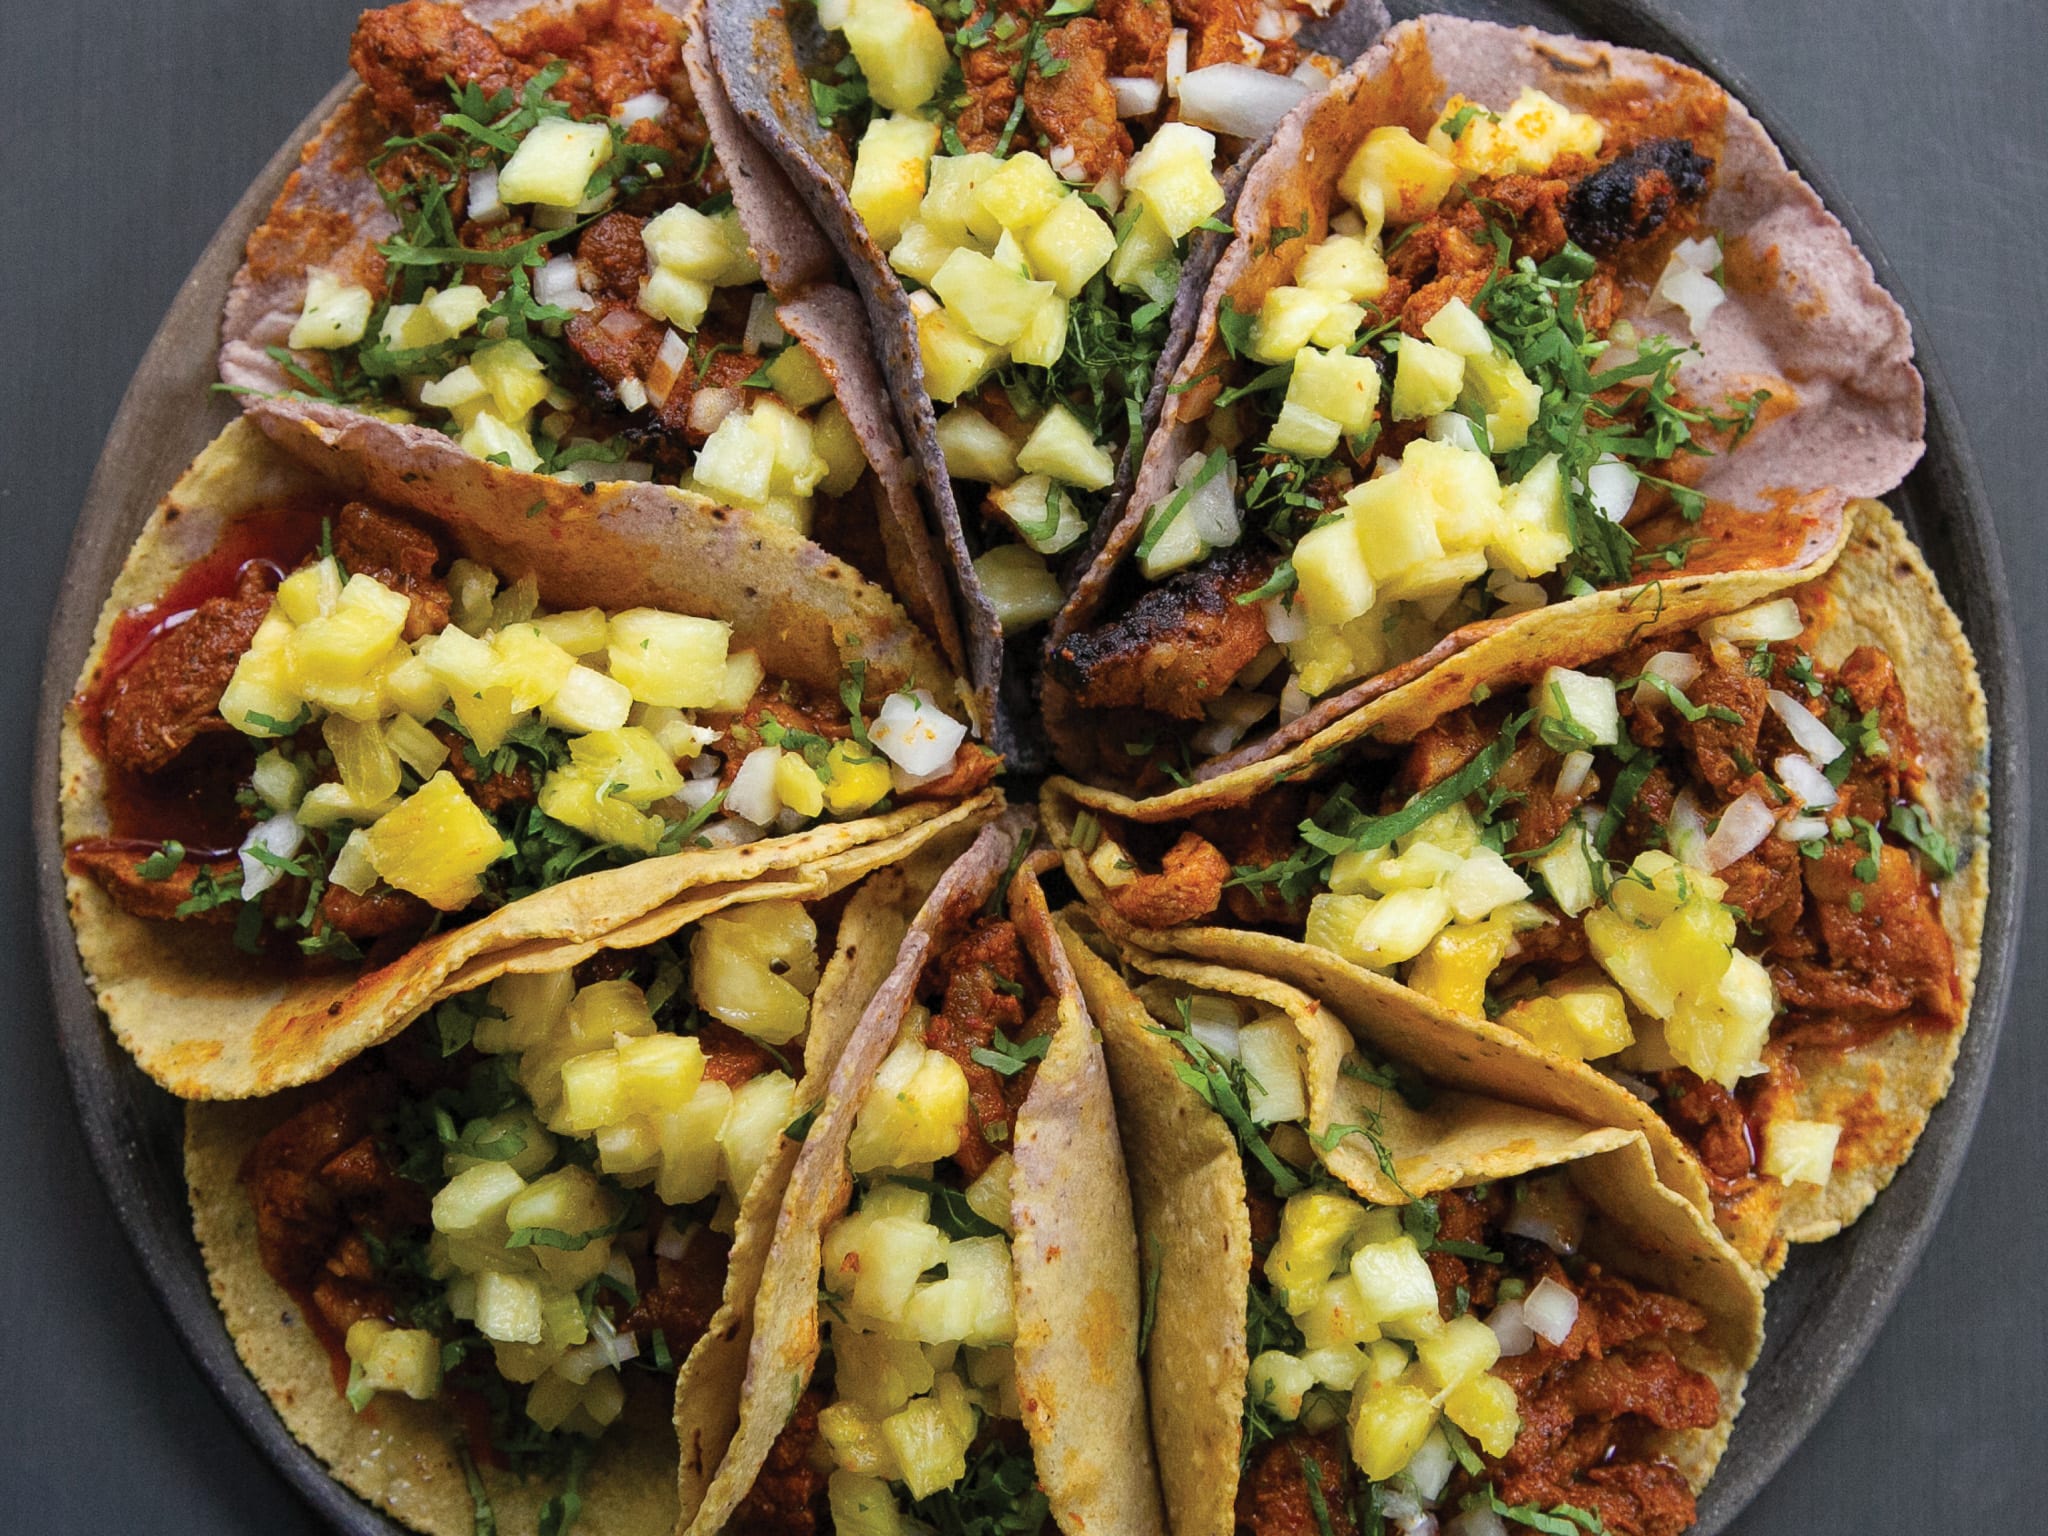 Tacos al pastor with onion, cilantro and fresh pineapple